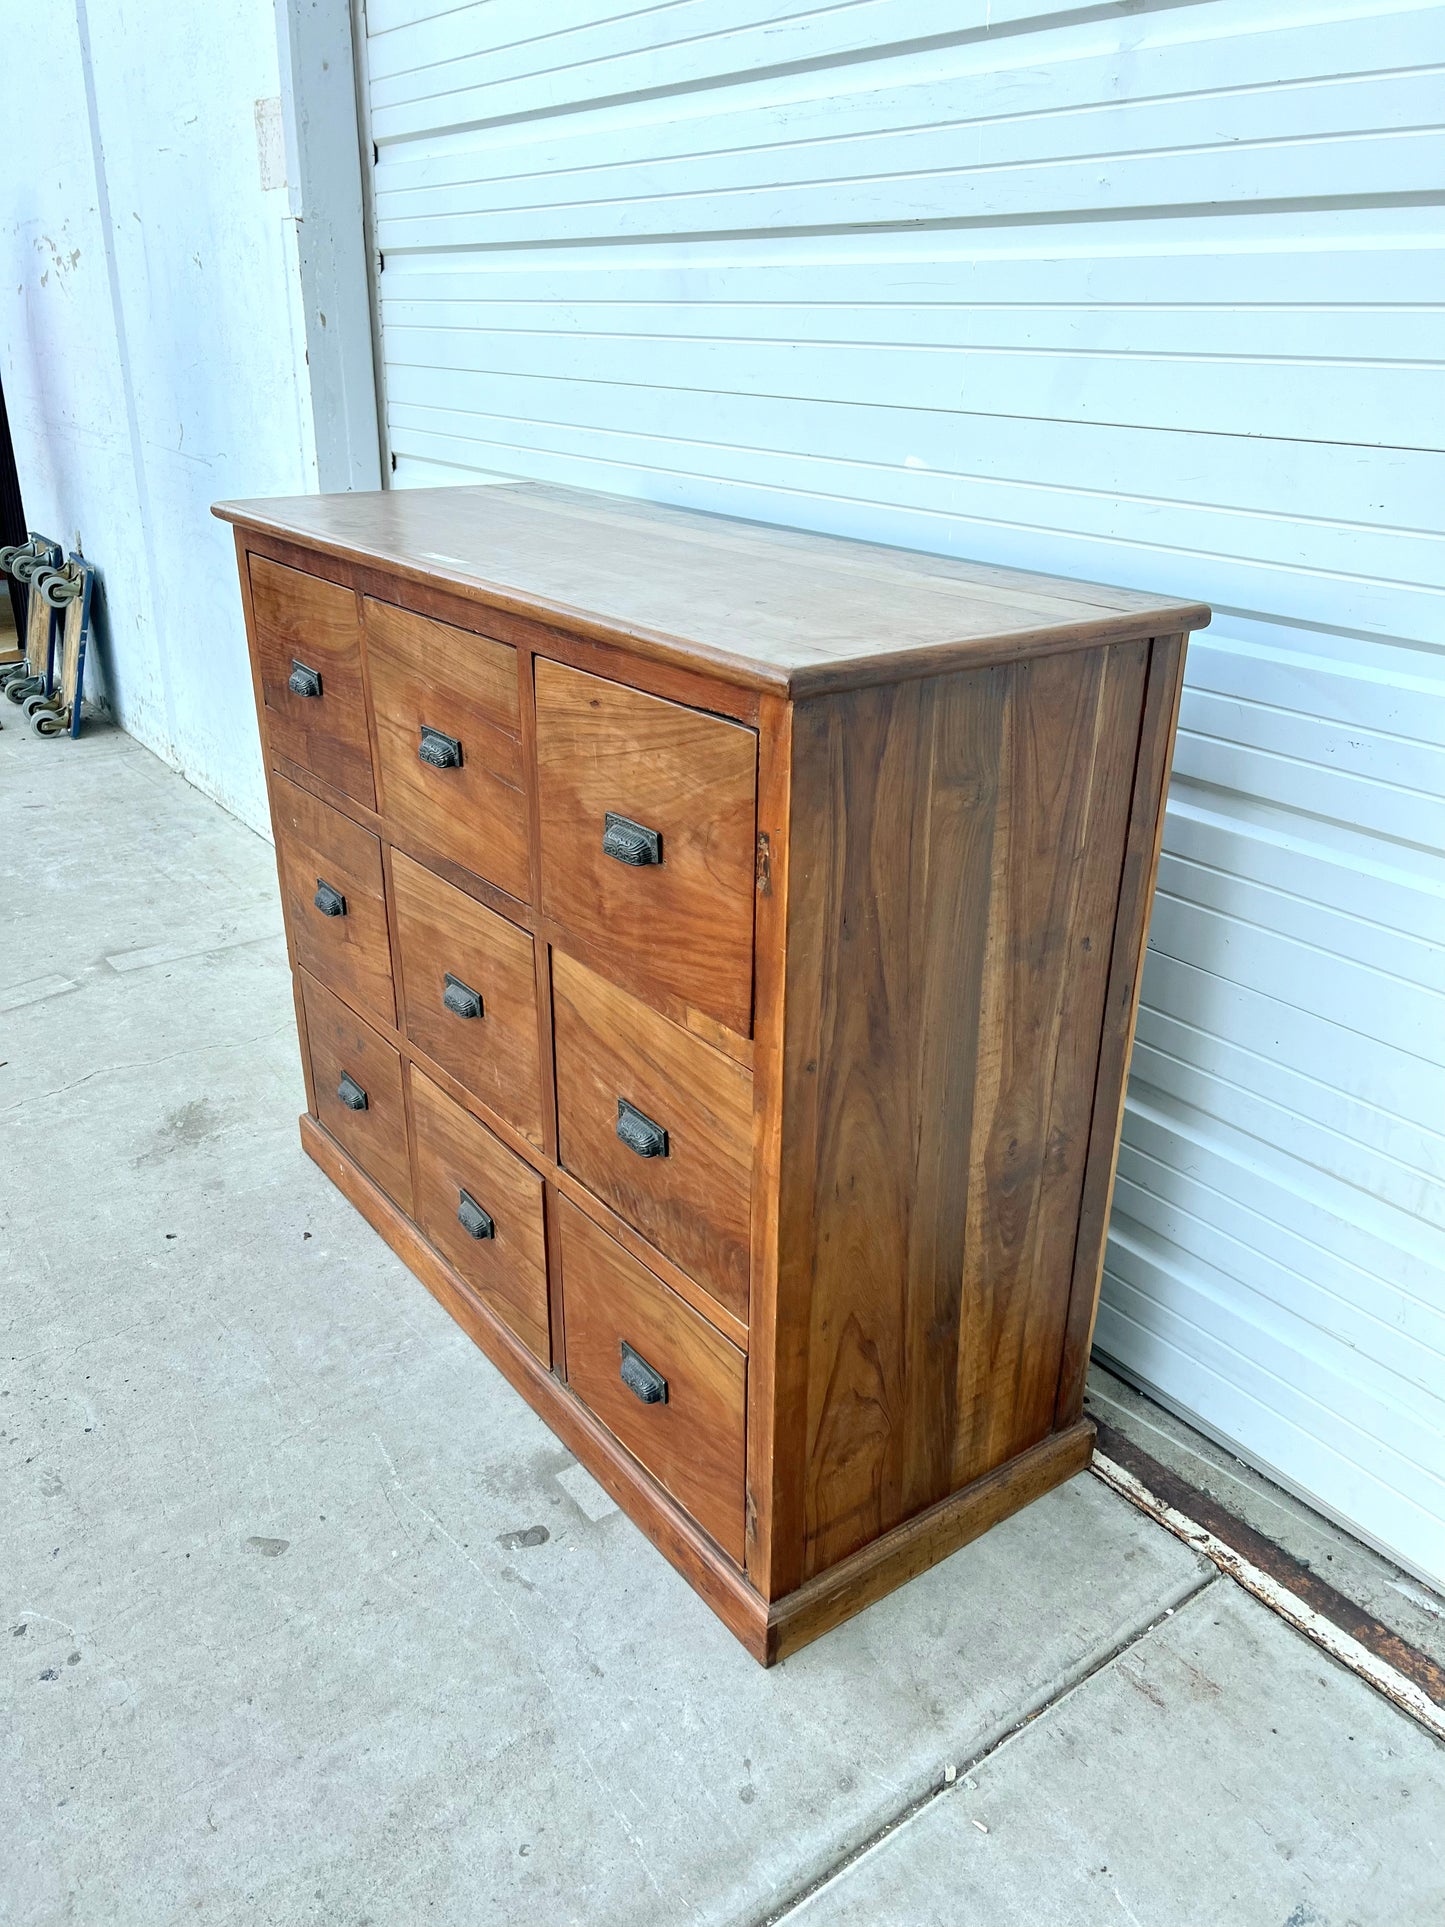 Wood Cabinet with 9 Drawers